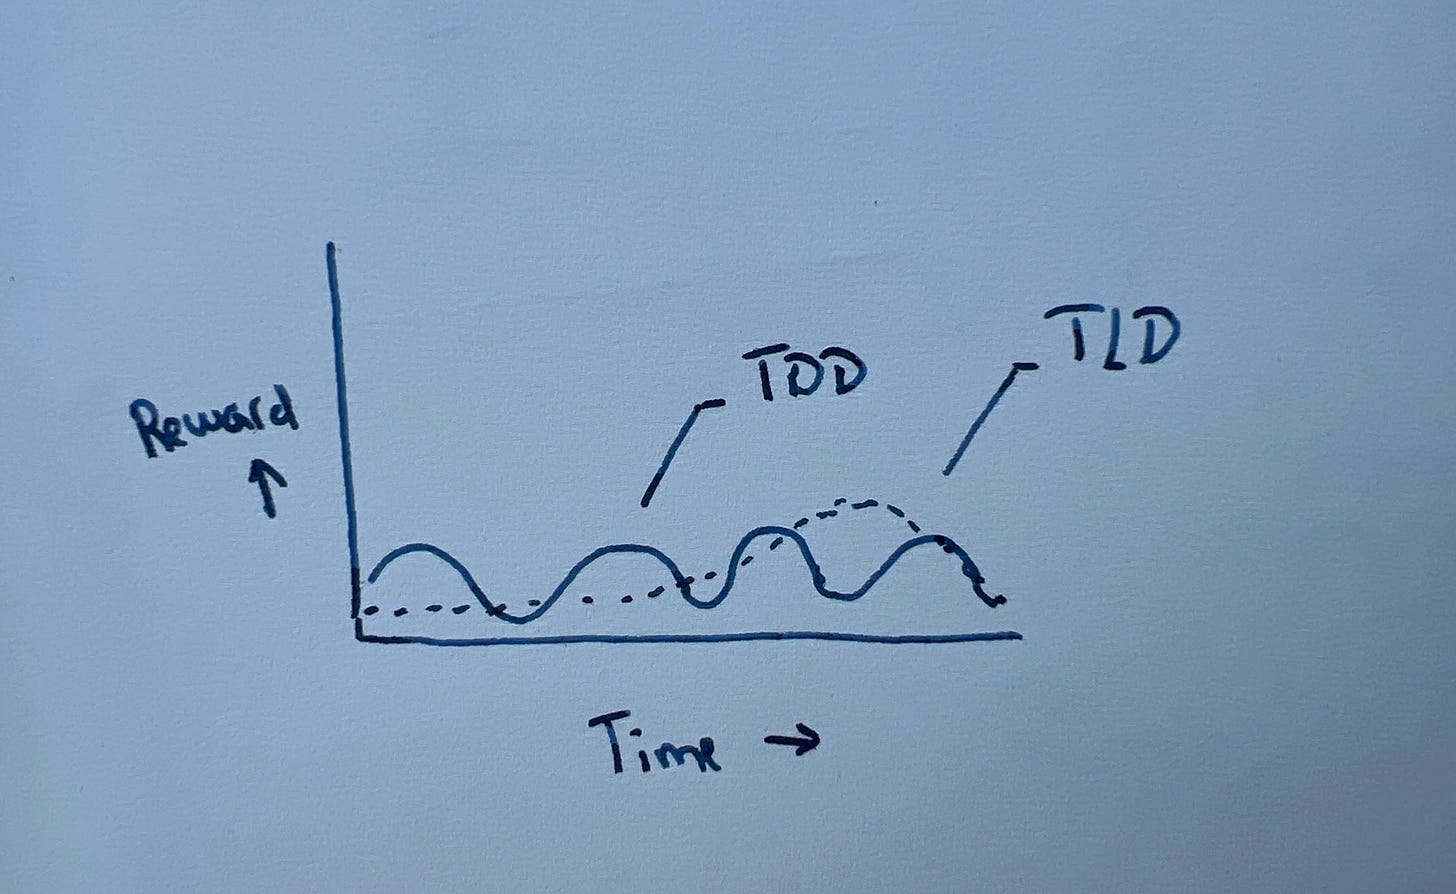 graph showing TDD provides continuous sense of reward vs TLD which has one spike